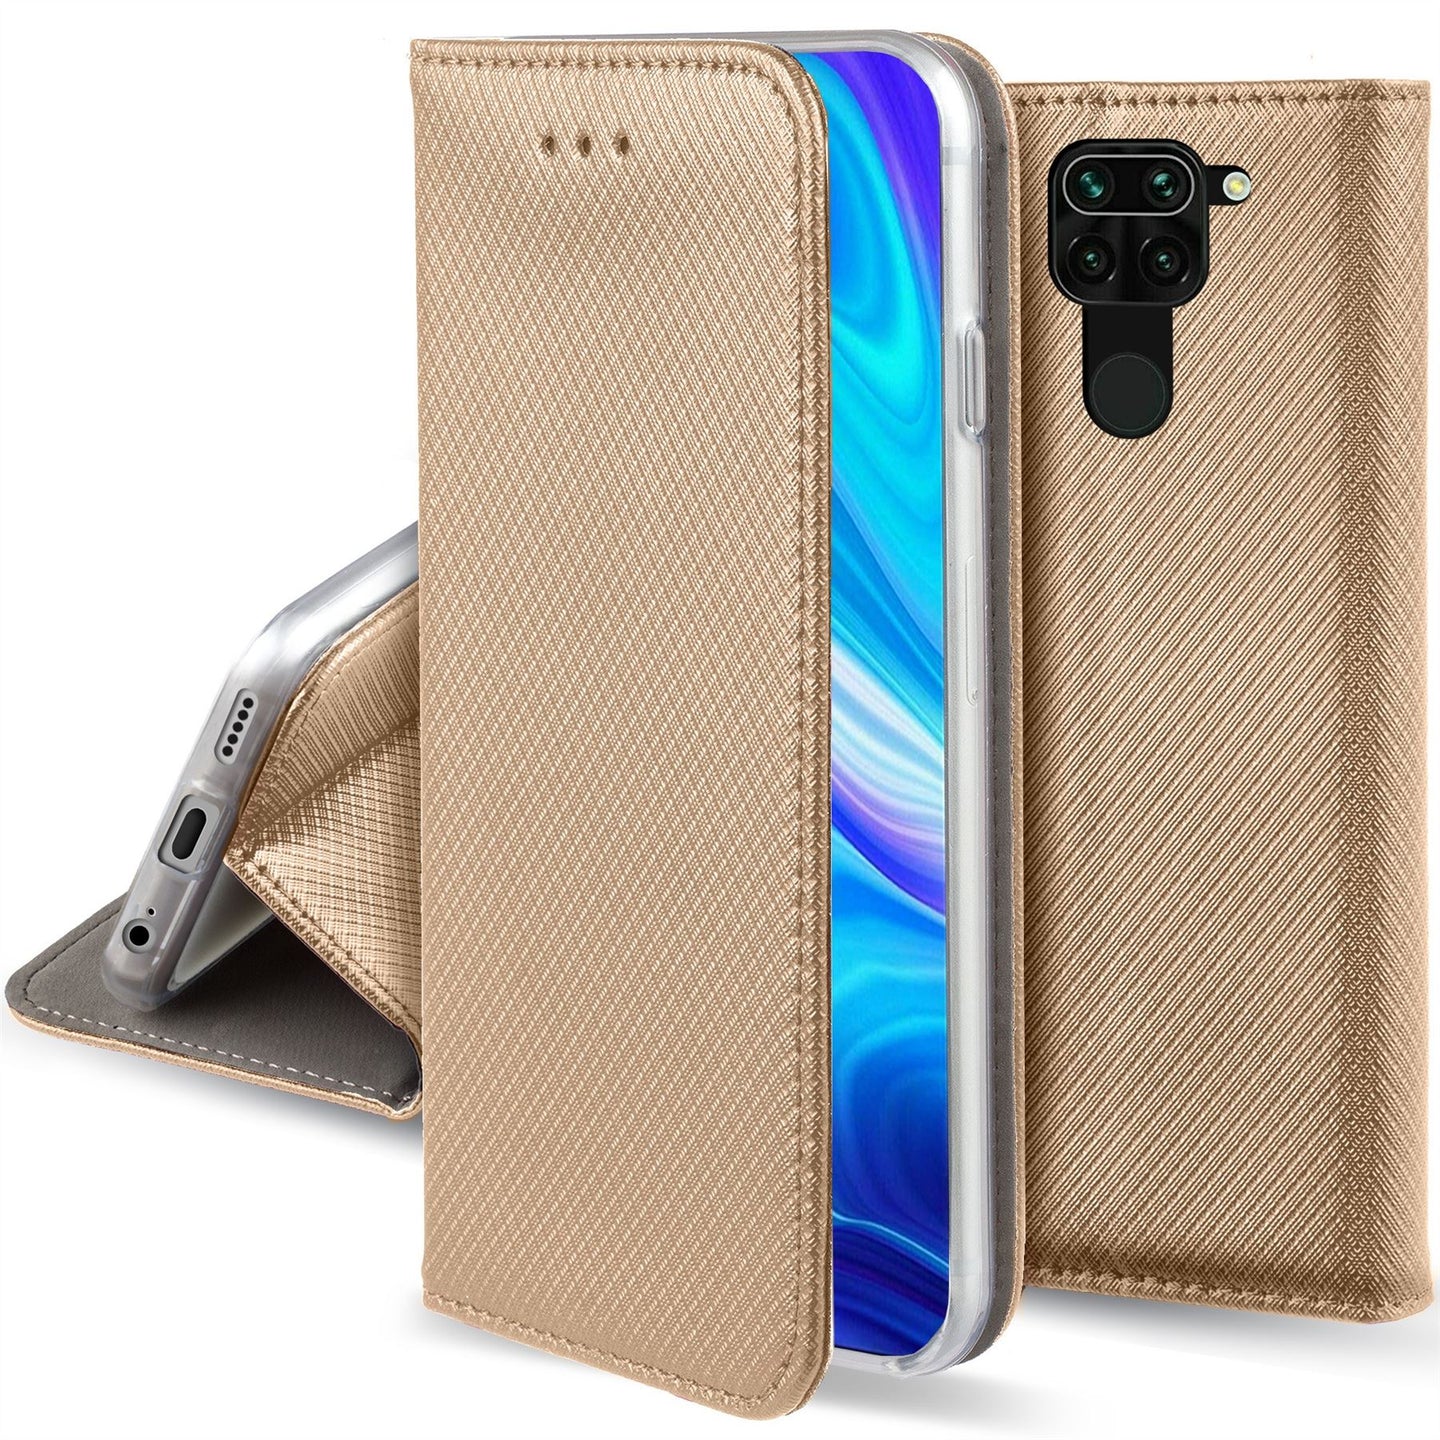 Moozy Case Flip Cover for Xiaomi Redmi Note 9, Gold - Smart Magnetic Flip Case with Card Holder and Stand